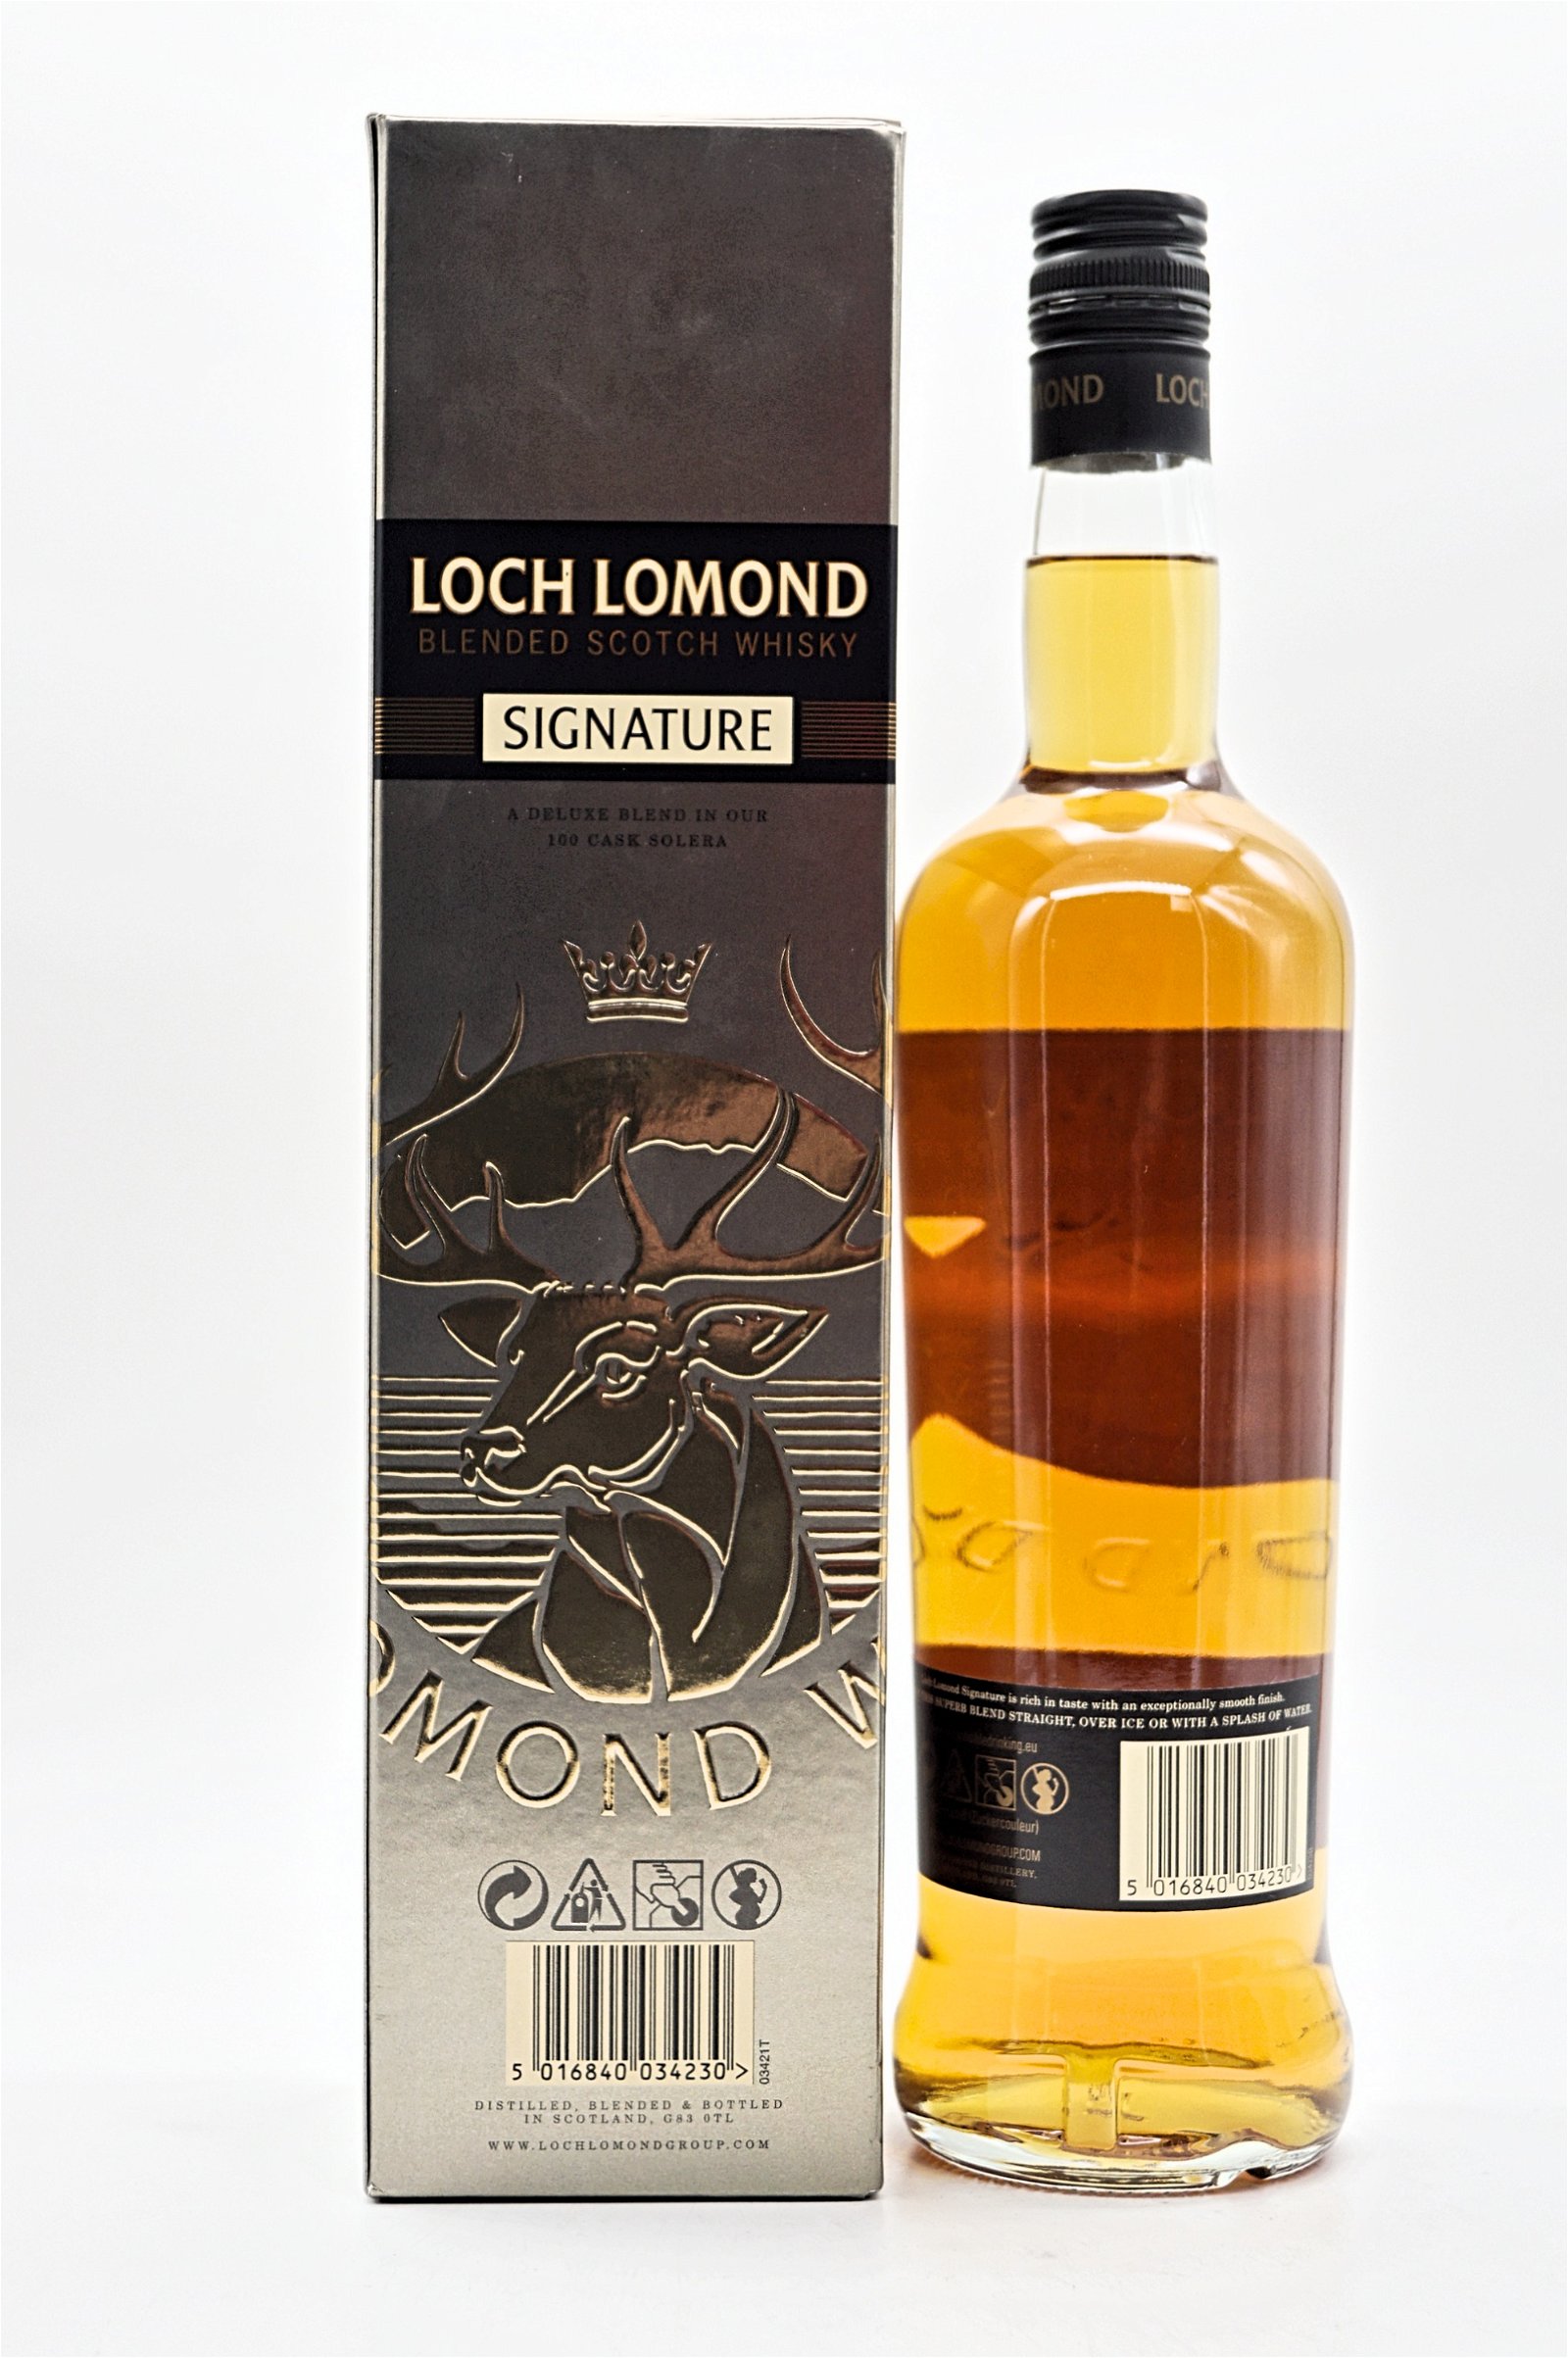 Loch Lomond Whiskies Signature Blended Scotch Whisky